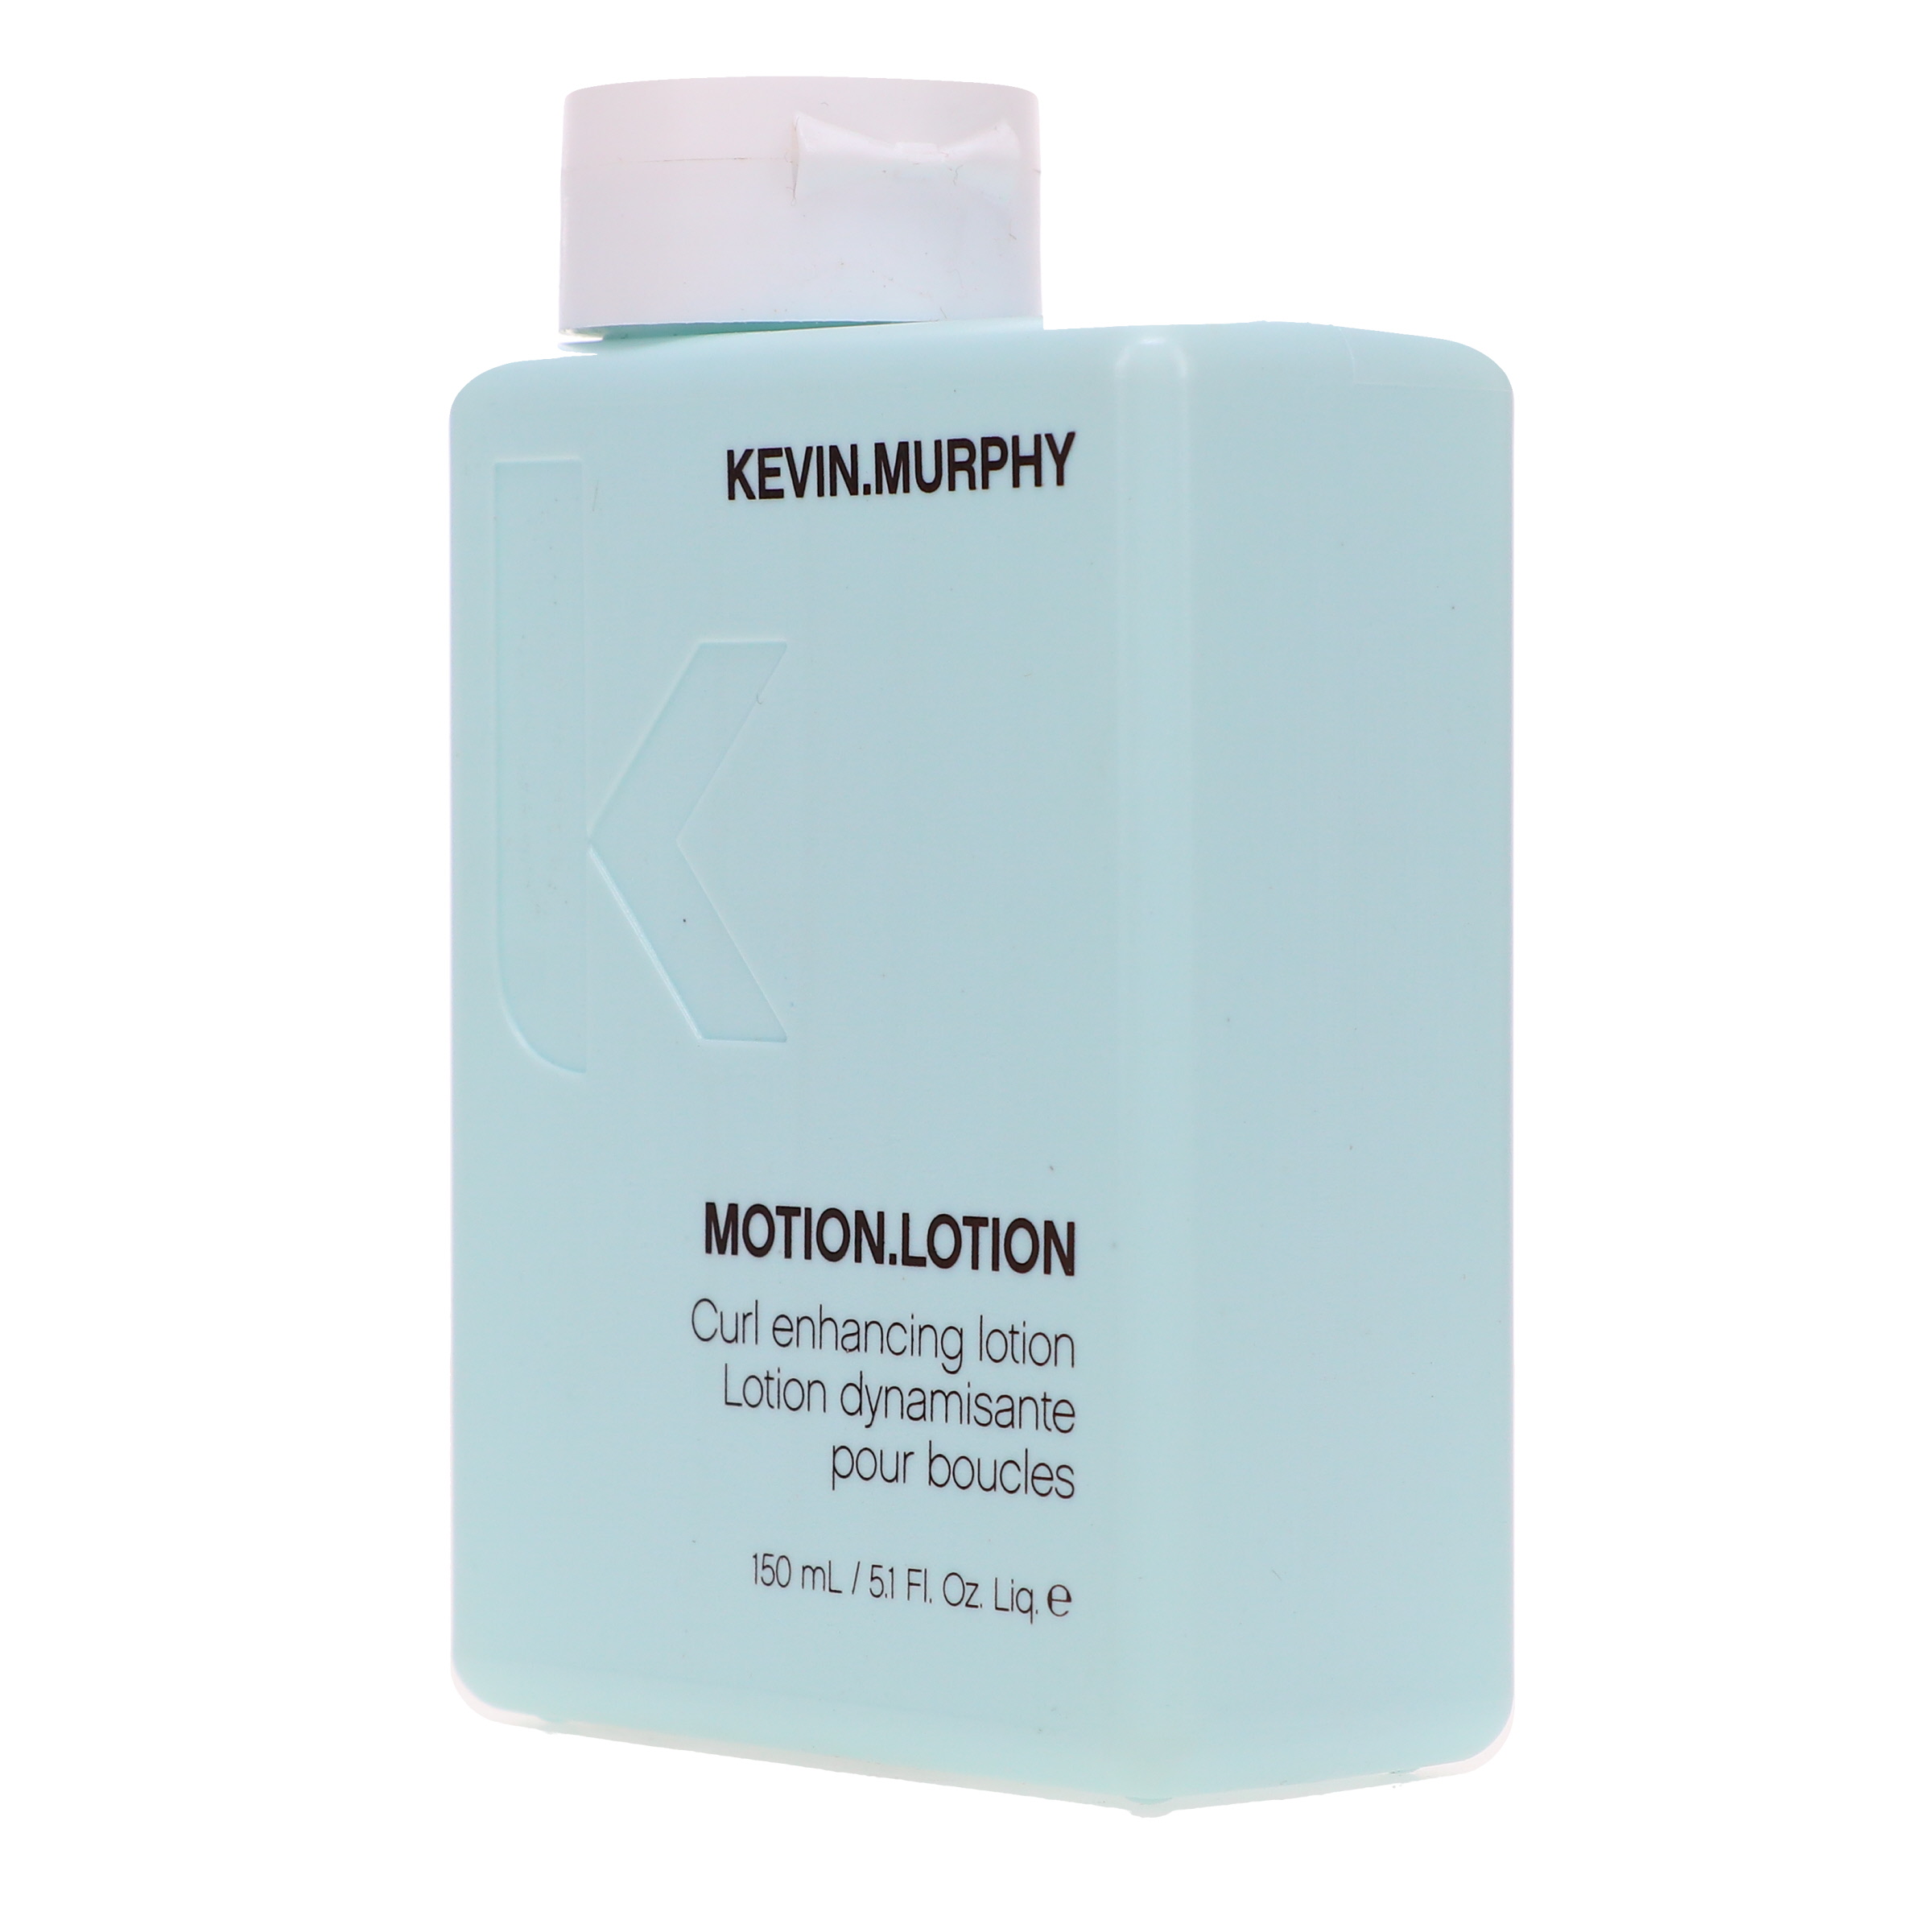 Kevin Murphy Motion.Lotion Curl Enhancing Lotion, 5.1 Oz - image 2 of 2